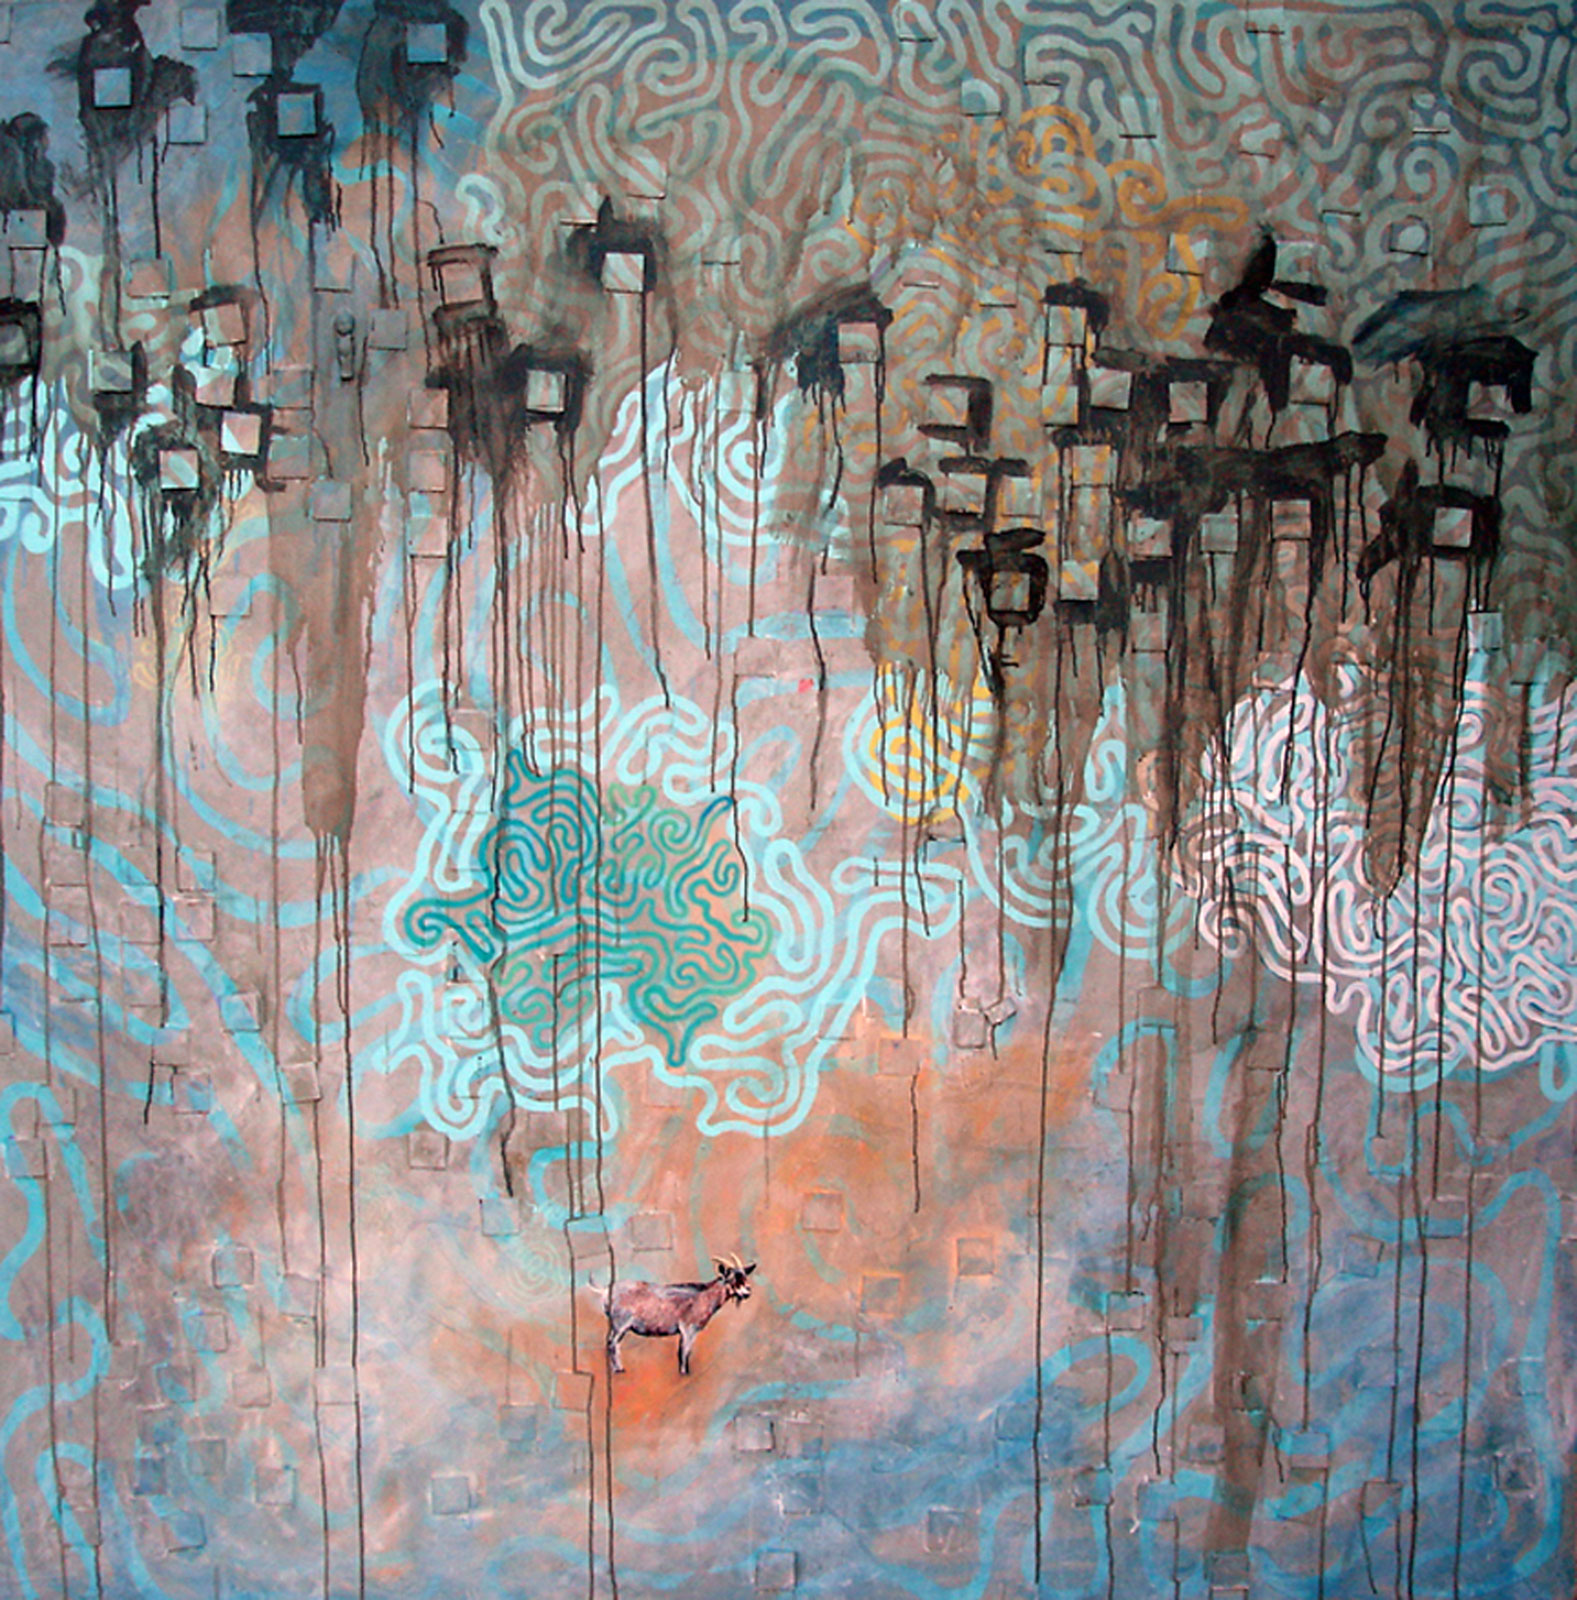  Hot Goat in the Cool Rain  Mixed media on canvas  72" x 72" 